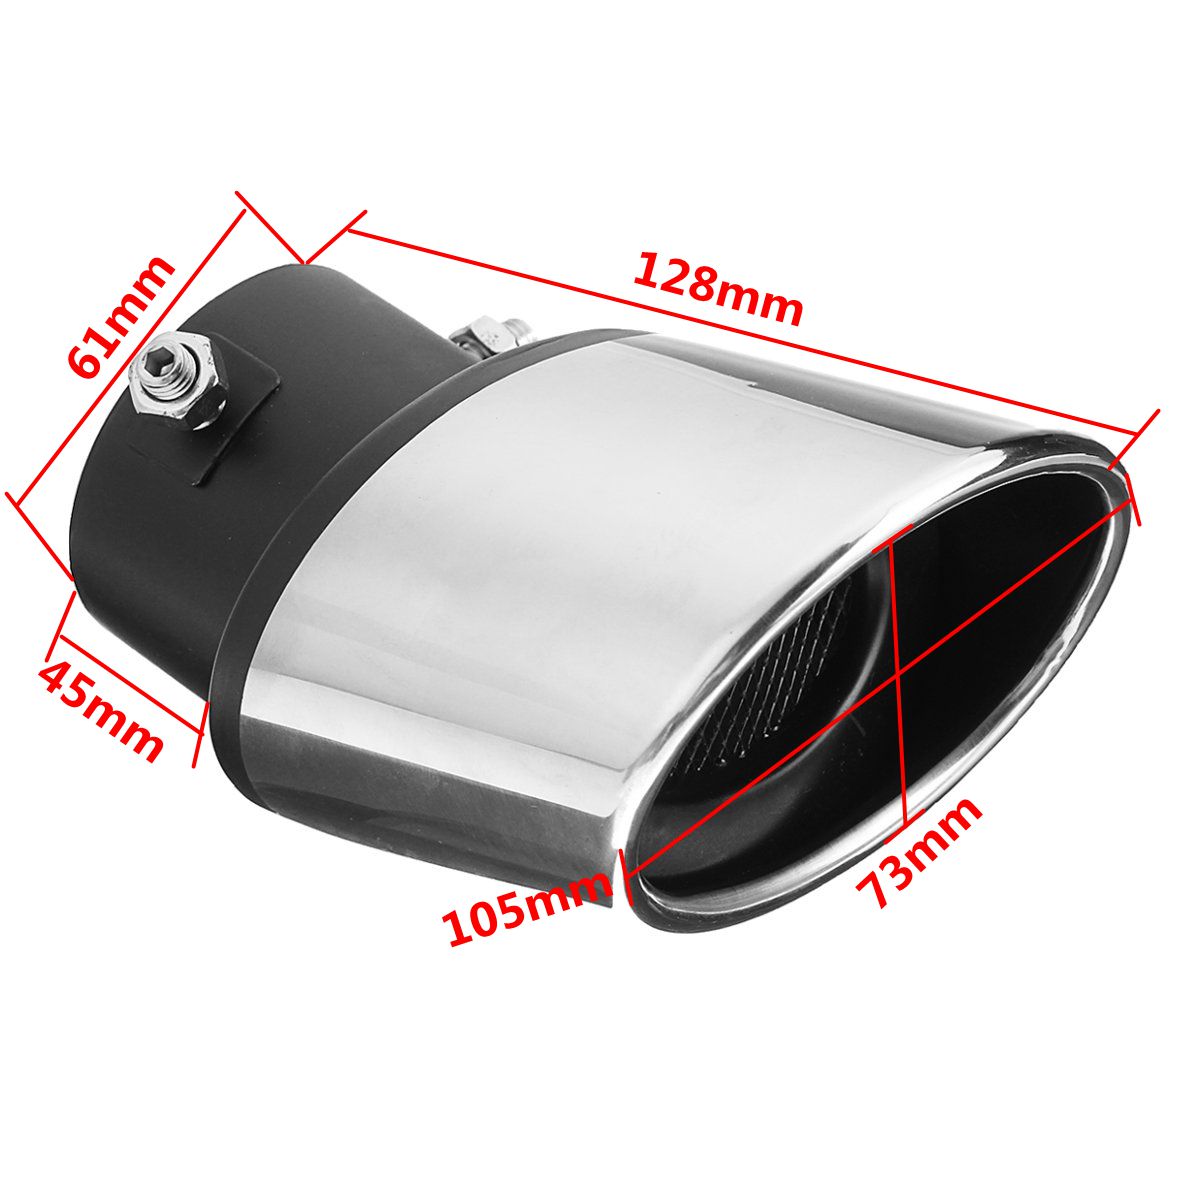 63MM-Stainless-Steel-Car-Tip-End-Trim-Tailpipe-Stainless-Steel-Muffler-Exhaust-For-Car-Auto-1194914